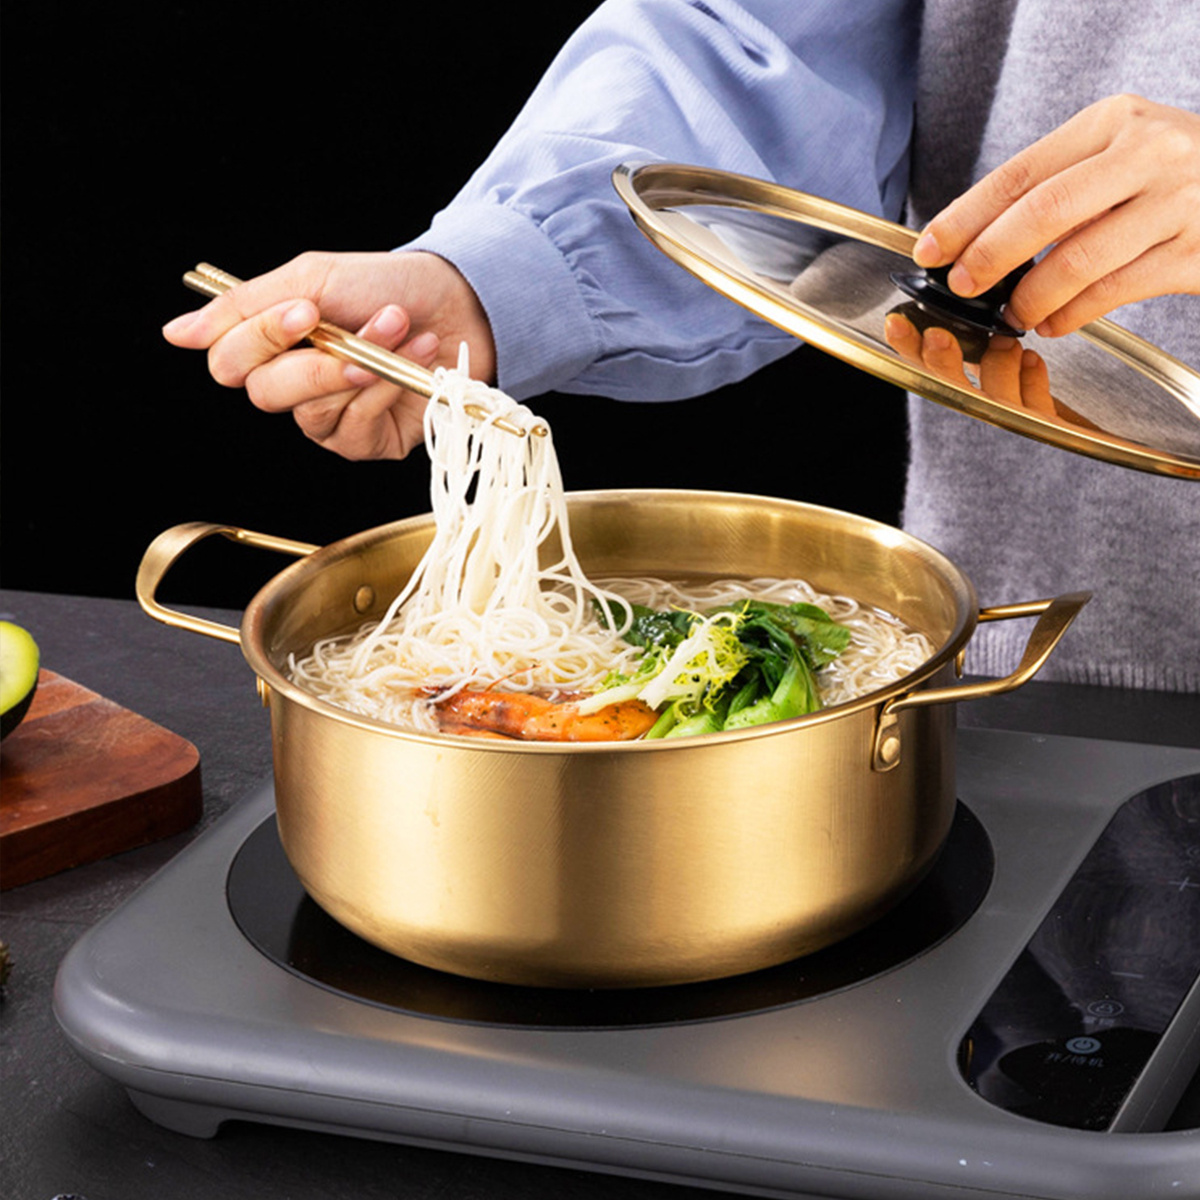 Drizzle Electric Hot Pot Cooker 1.8L,Skillet Grill Cooking  Steamer,Dormitory Office Portable Ramen Cooker Simmer Pot,Suitable For  Noodles Steak Cooker